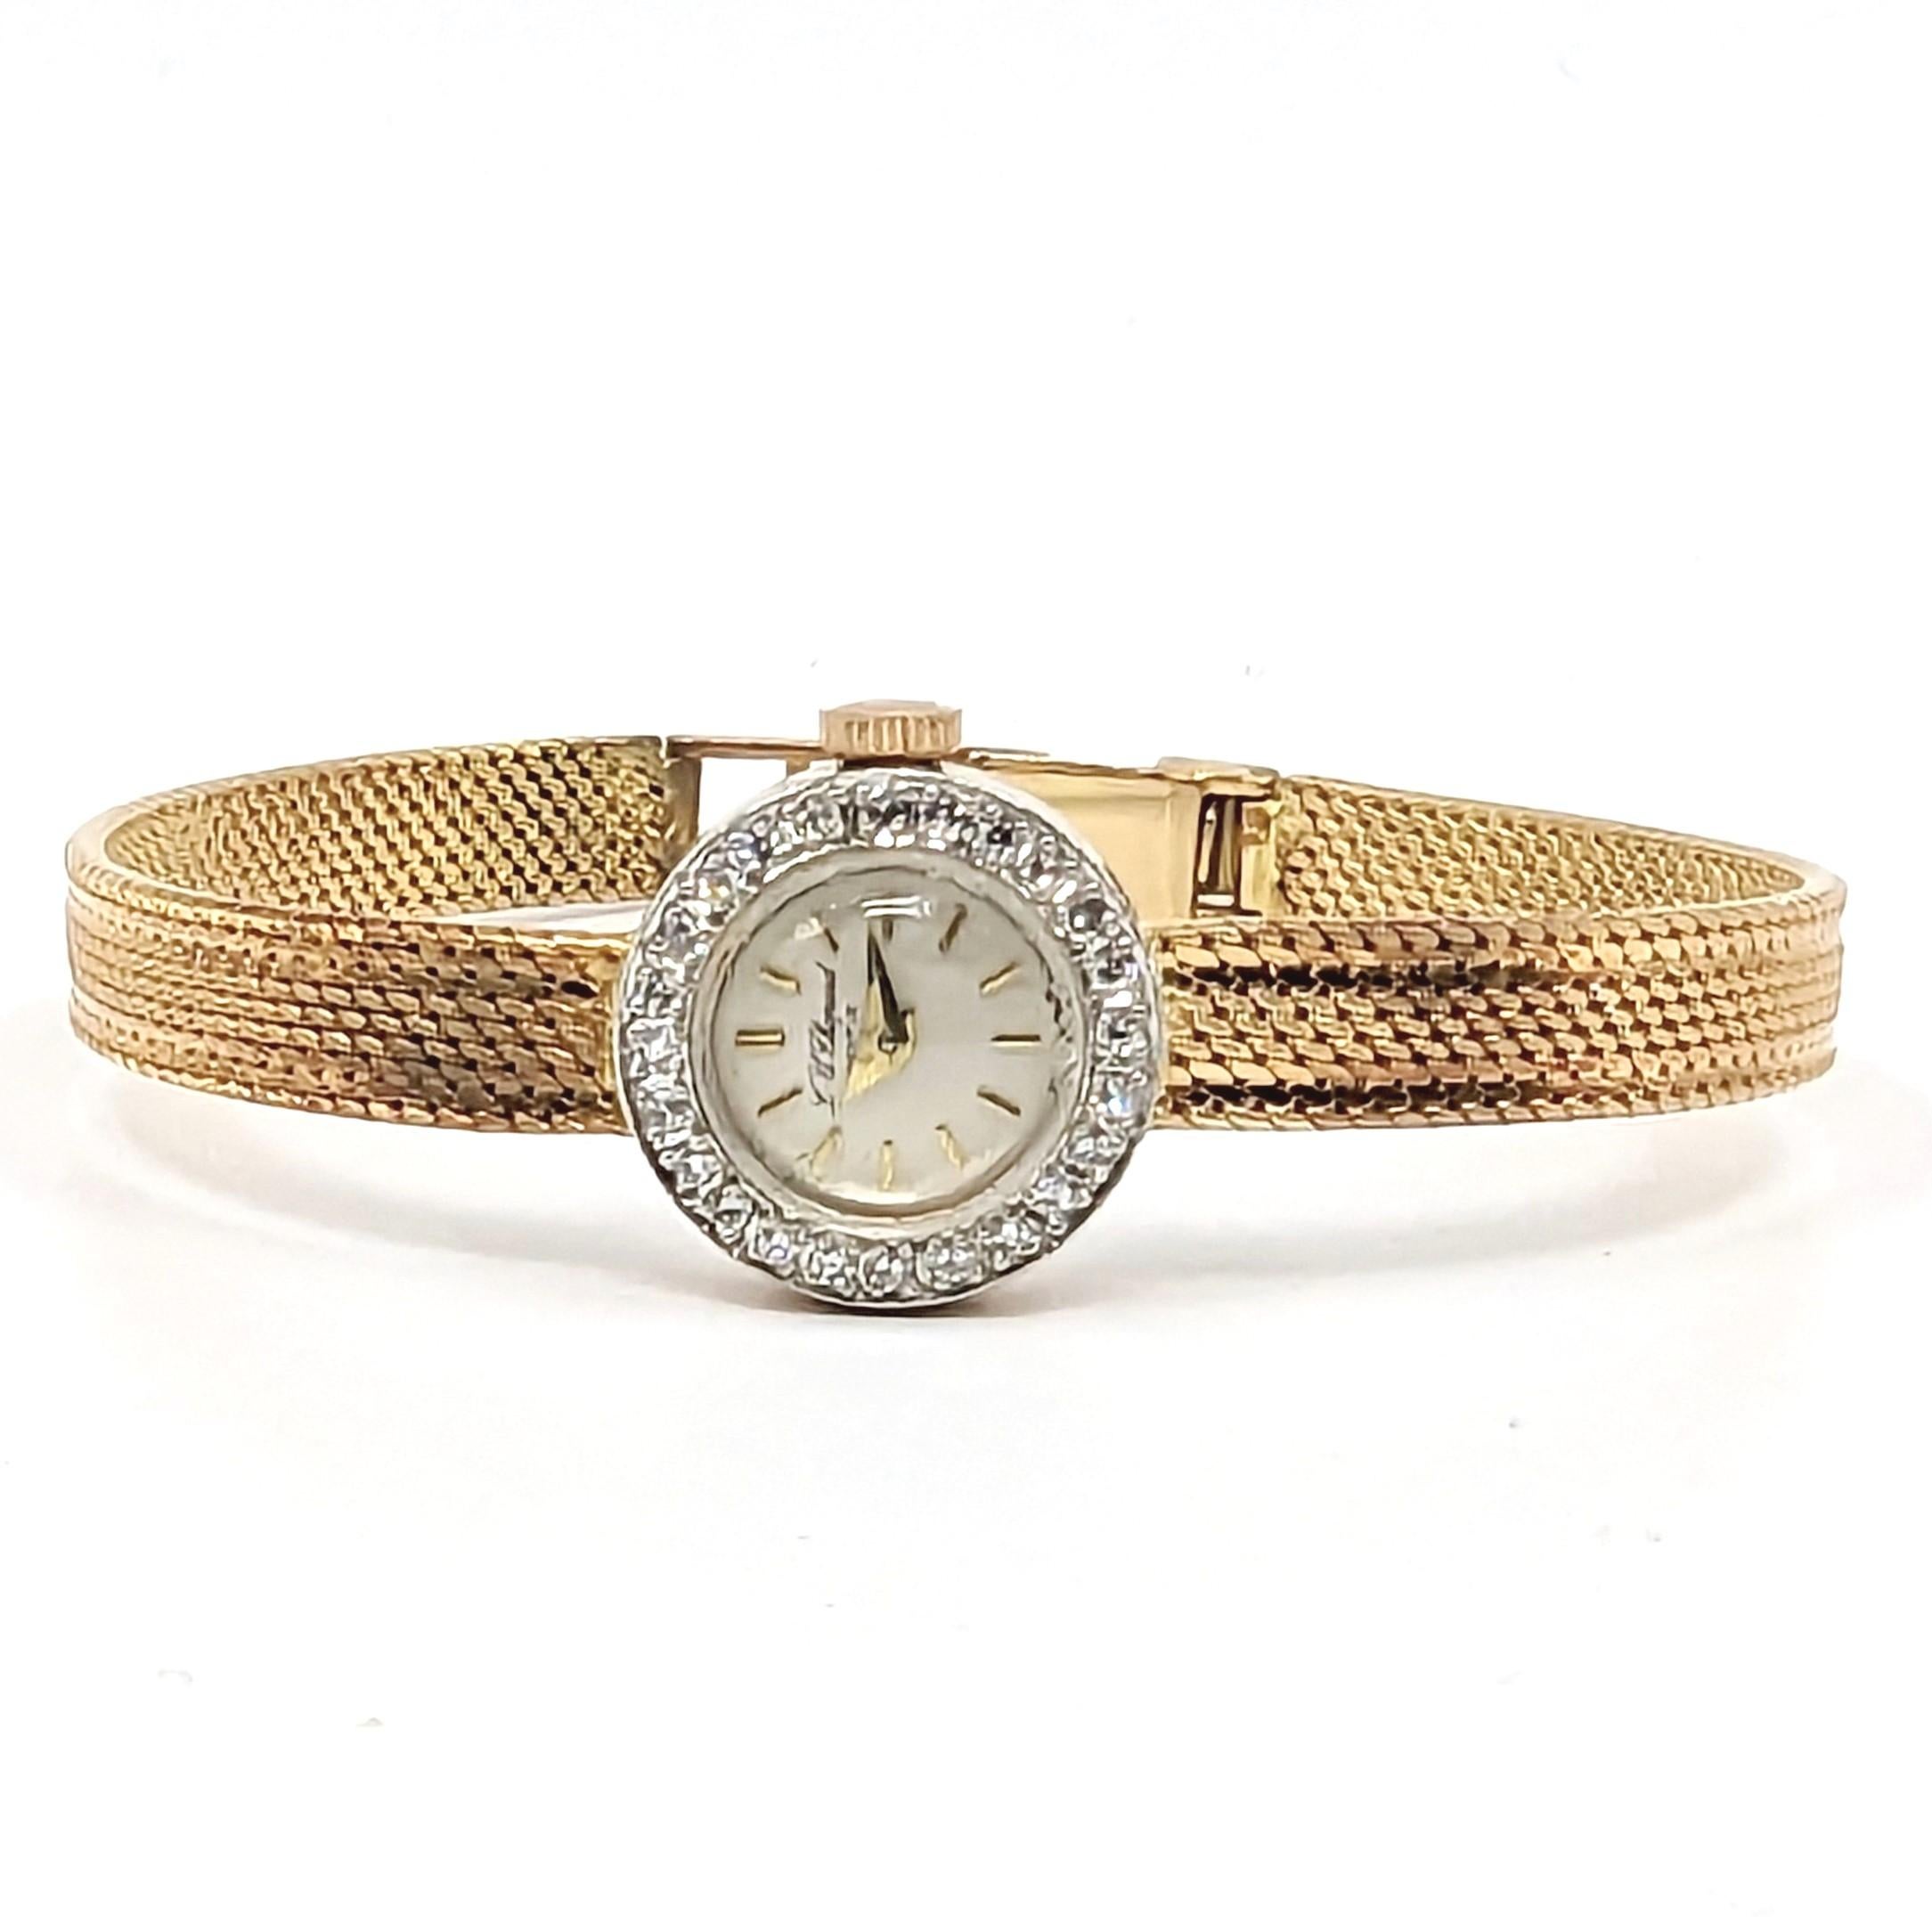 A vintage and fine L.U.Chopard ladies diamond watch in 18k solid pink/rose gold bezel lavish diamonds set, silvered dial, snap on case back with dedication engraving, attached to a solid pink/rose gold mesh bracelet with buckle closure

Circa: